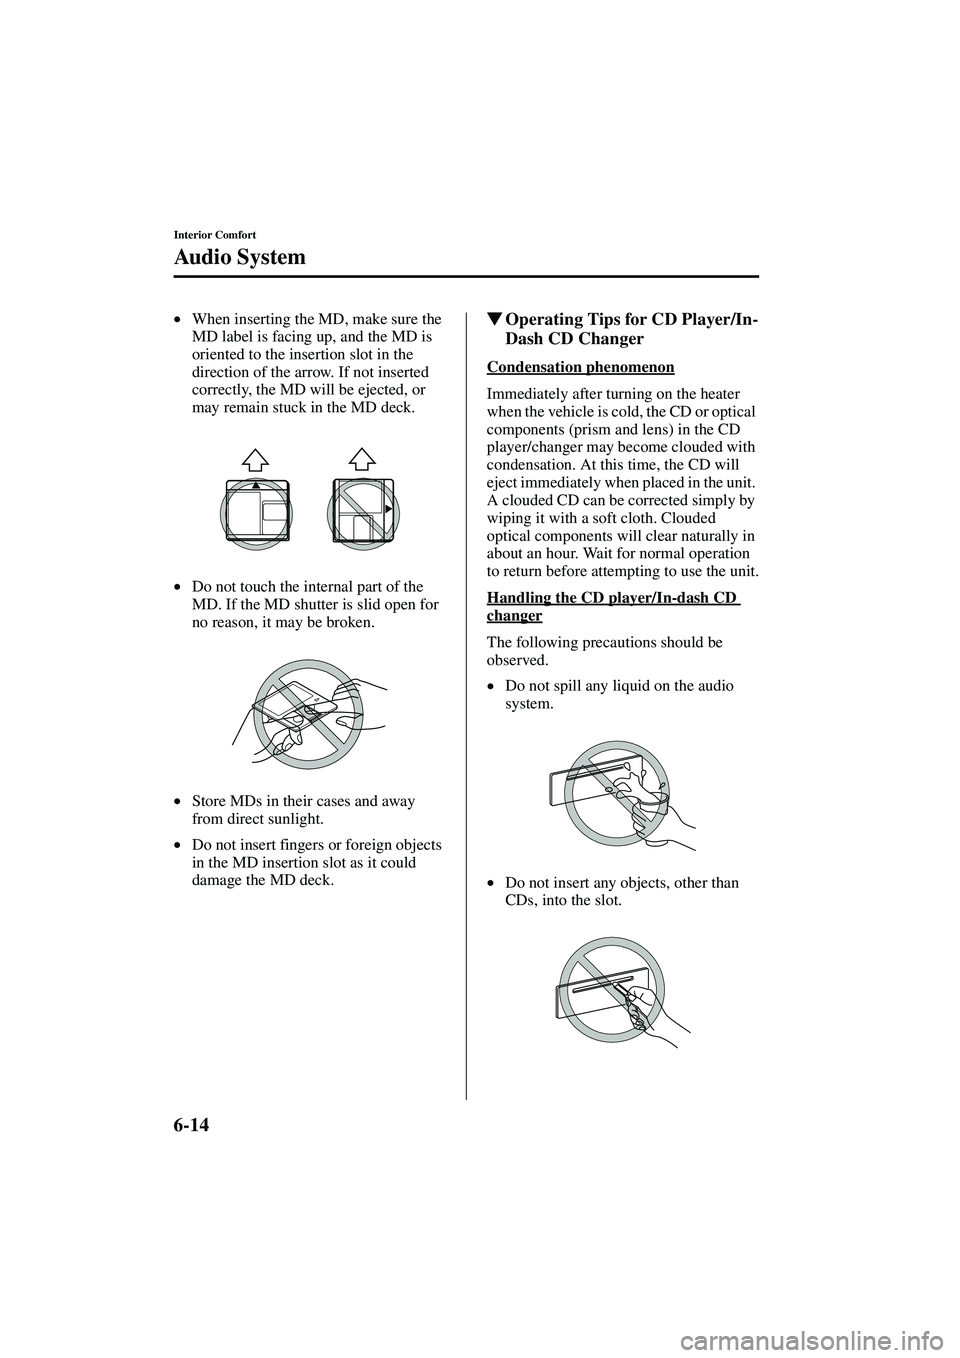 MAZDA MODEL MX-5 MIATA 2003  Owners Manual 6-14
Interior Comfort
Au di o S ys t em
Form No. 8R09-EA-02G
•When inserting the MD, make sure the 
MD label is facing up, and the MD is 
oriented to the insertion slot in the 
direction of the arro